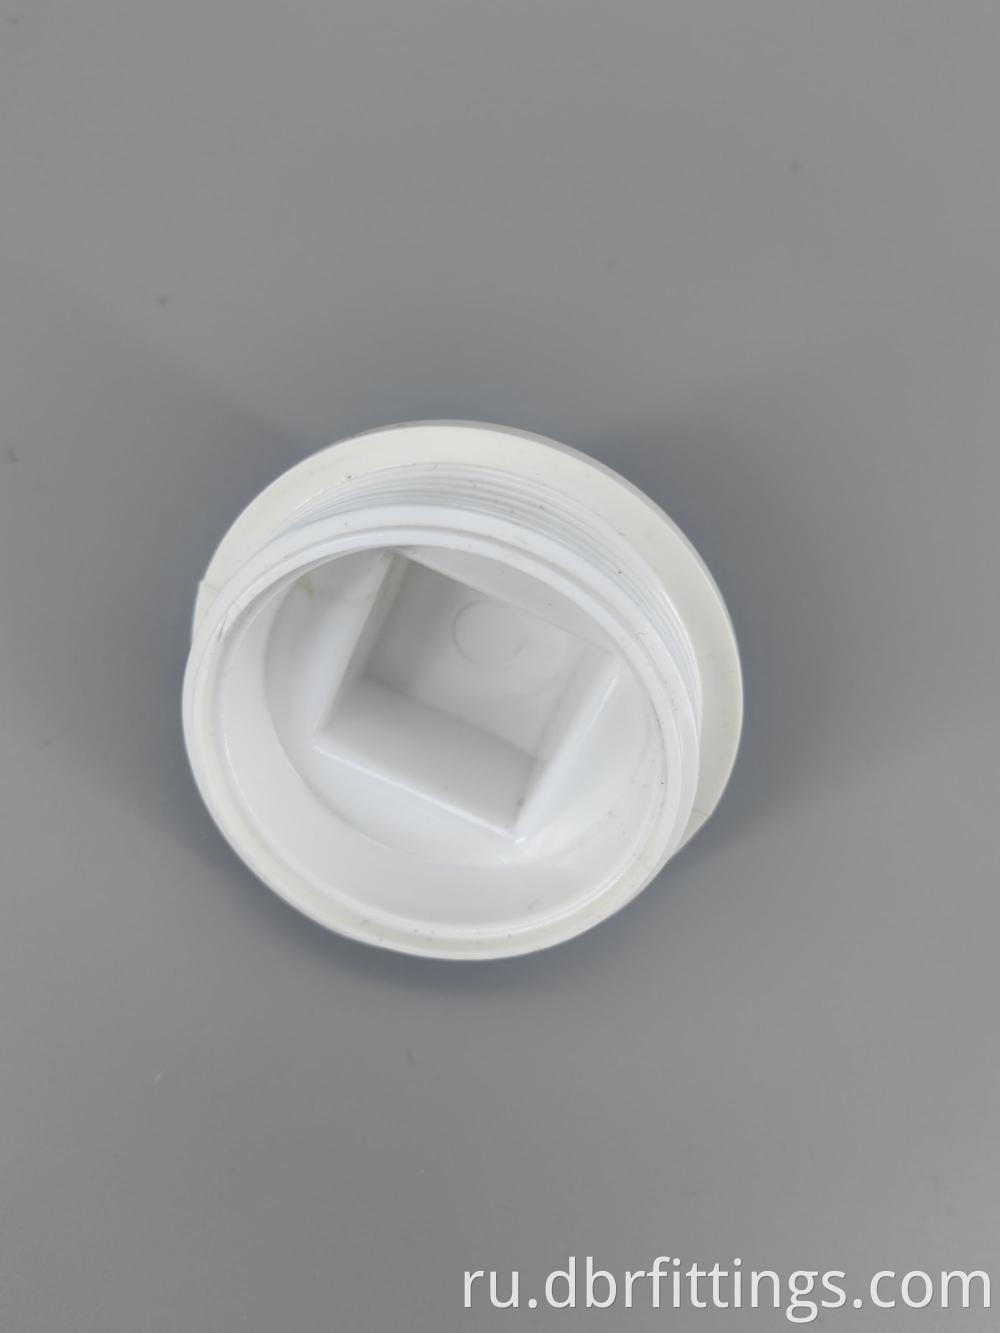 UPC PVC fittings CLEANOUT PLUG for new home